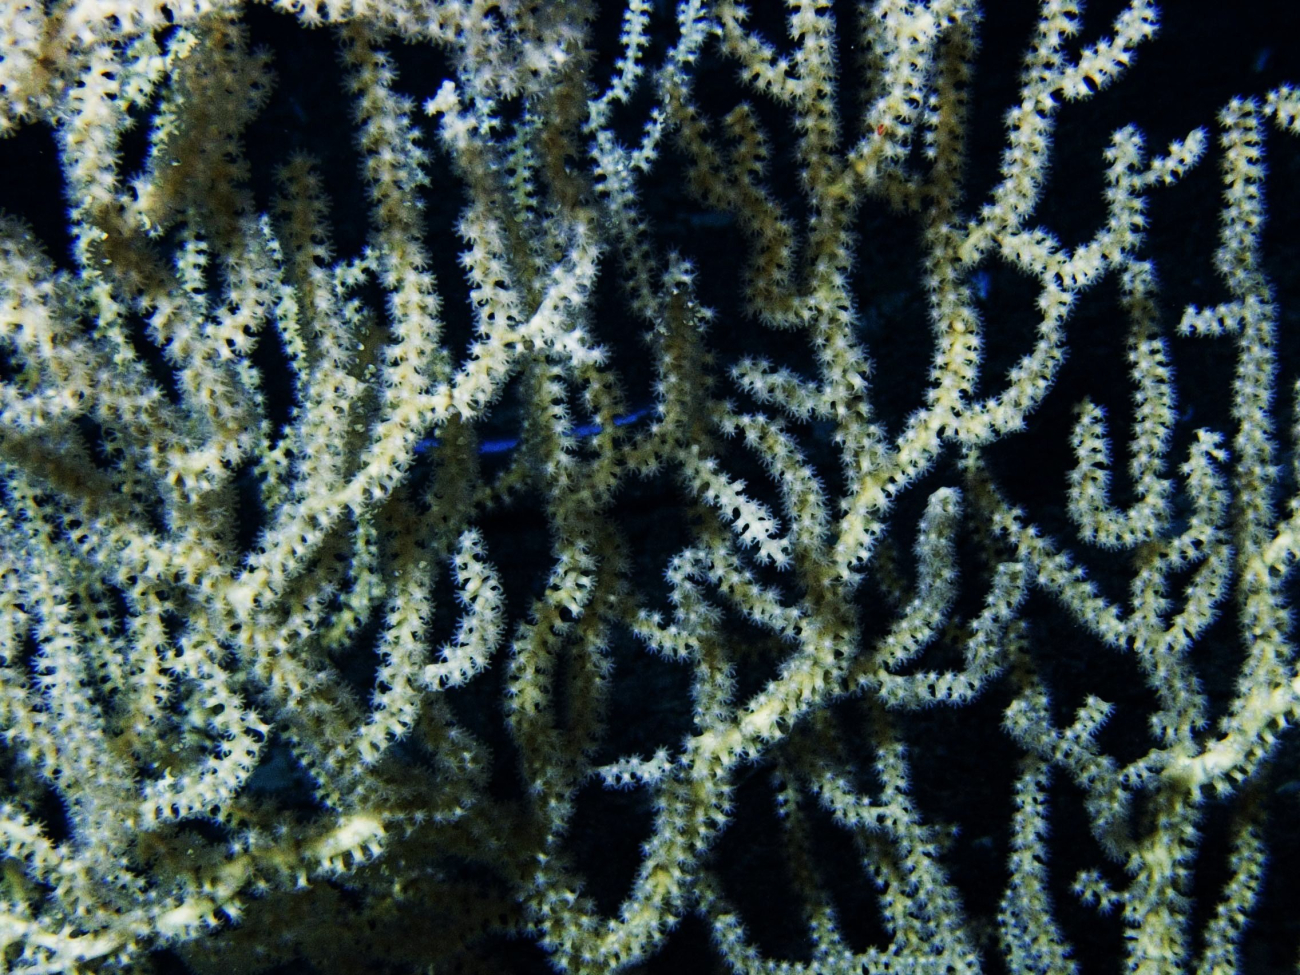 Closeup view of the white bamboo coral (Keratoisis flexibilis) showing the coral's extended feeding polyps